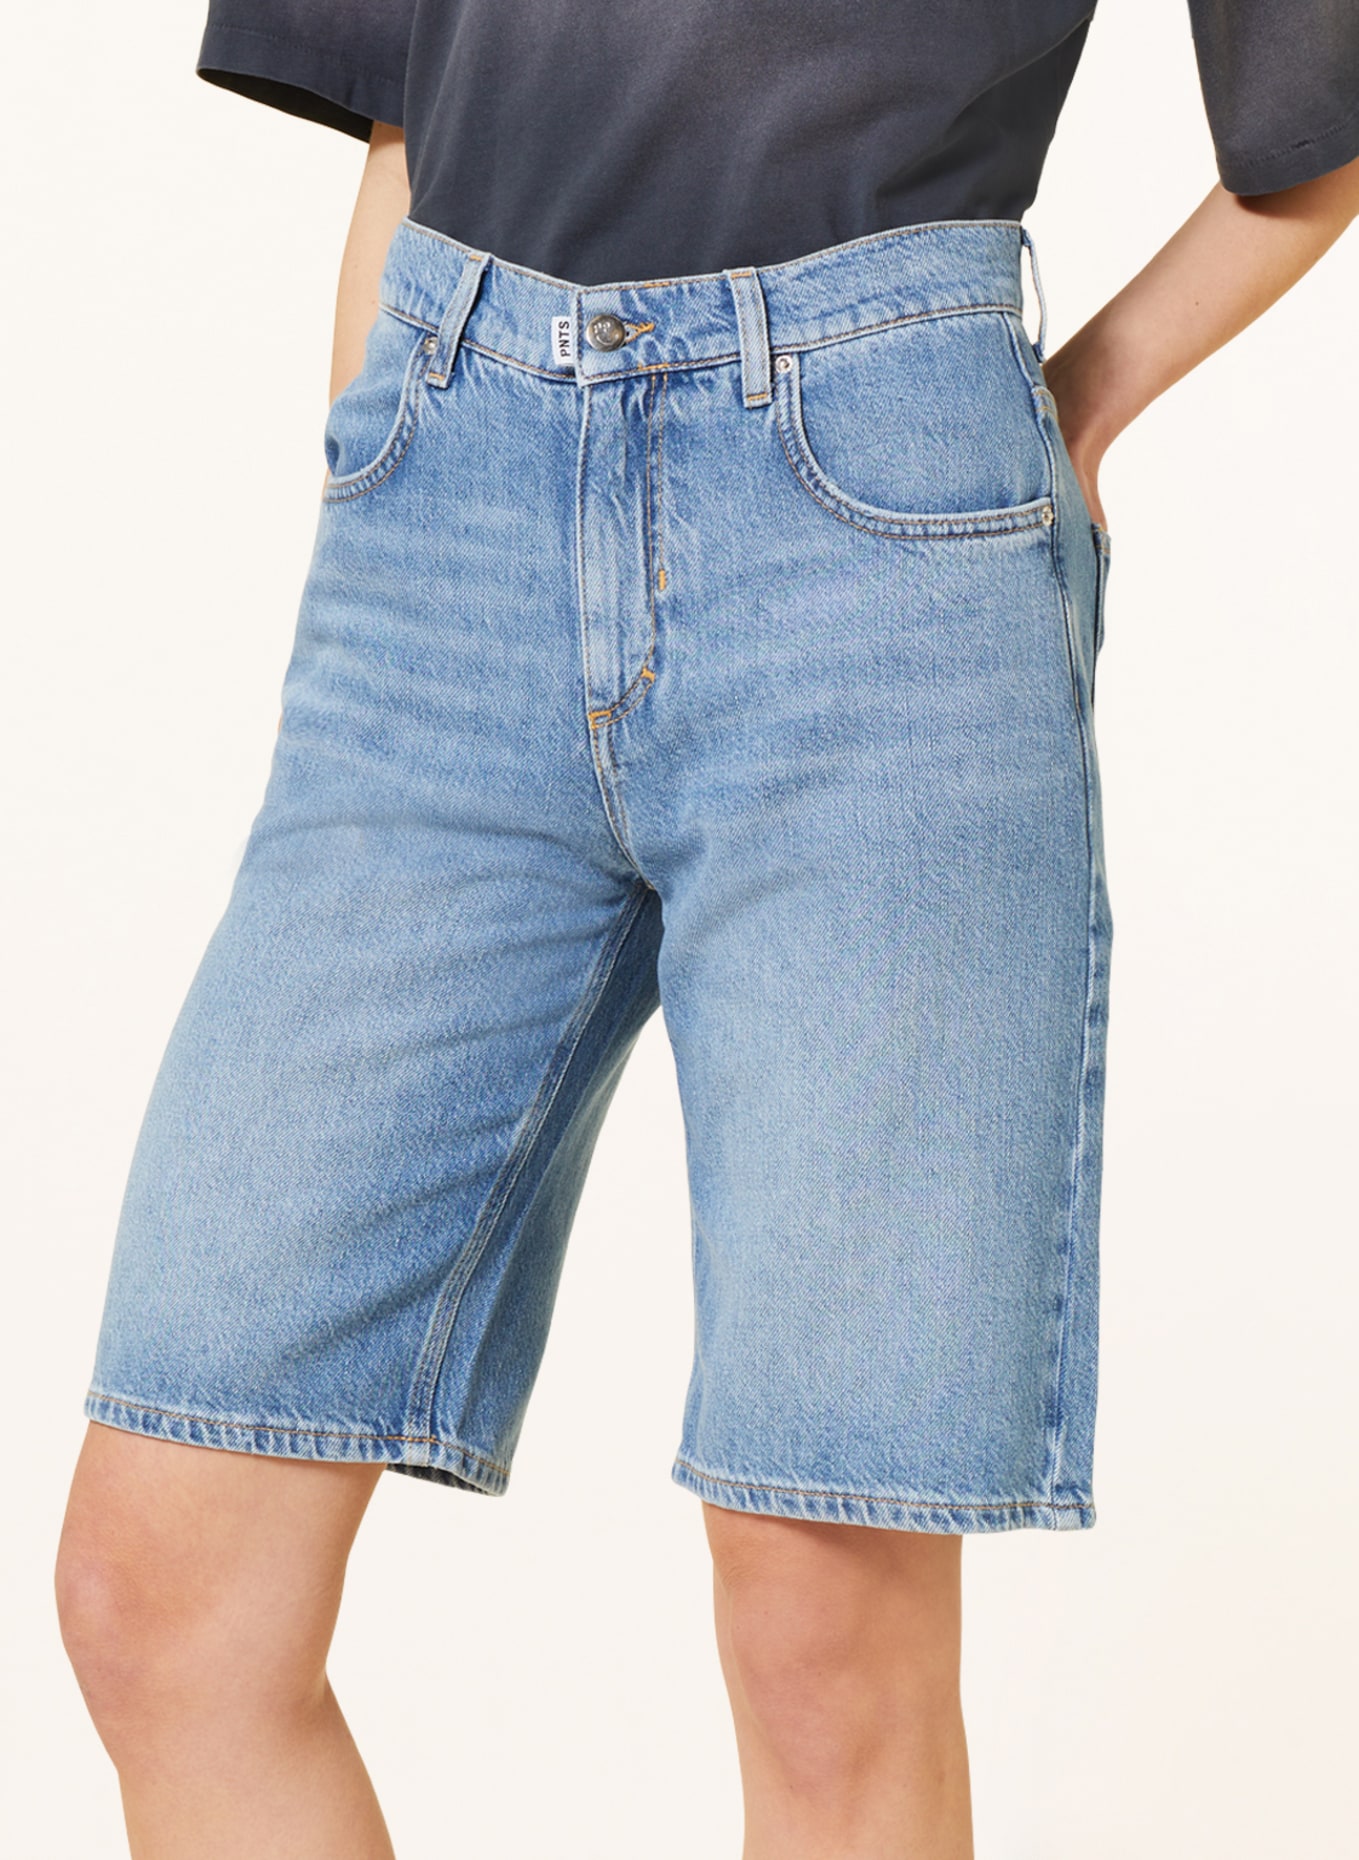 PNTS Denim shorts THE BAGGY, Color: 28 FADED BLUE (Image 5)